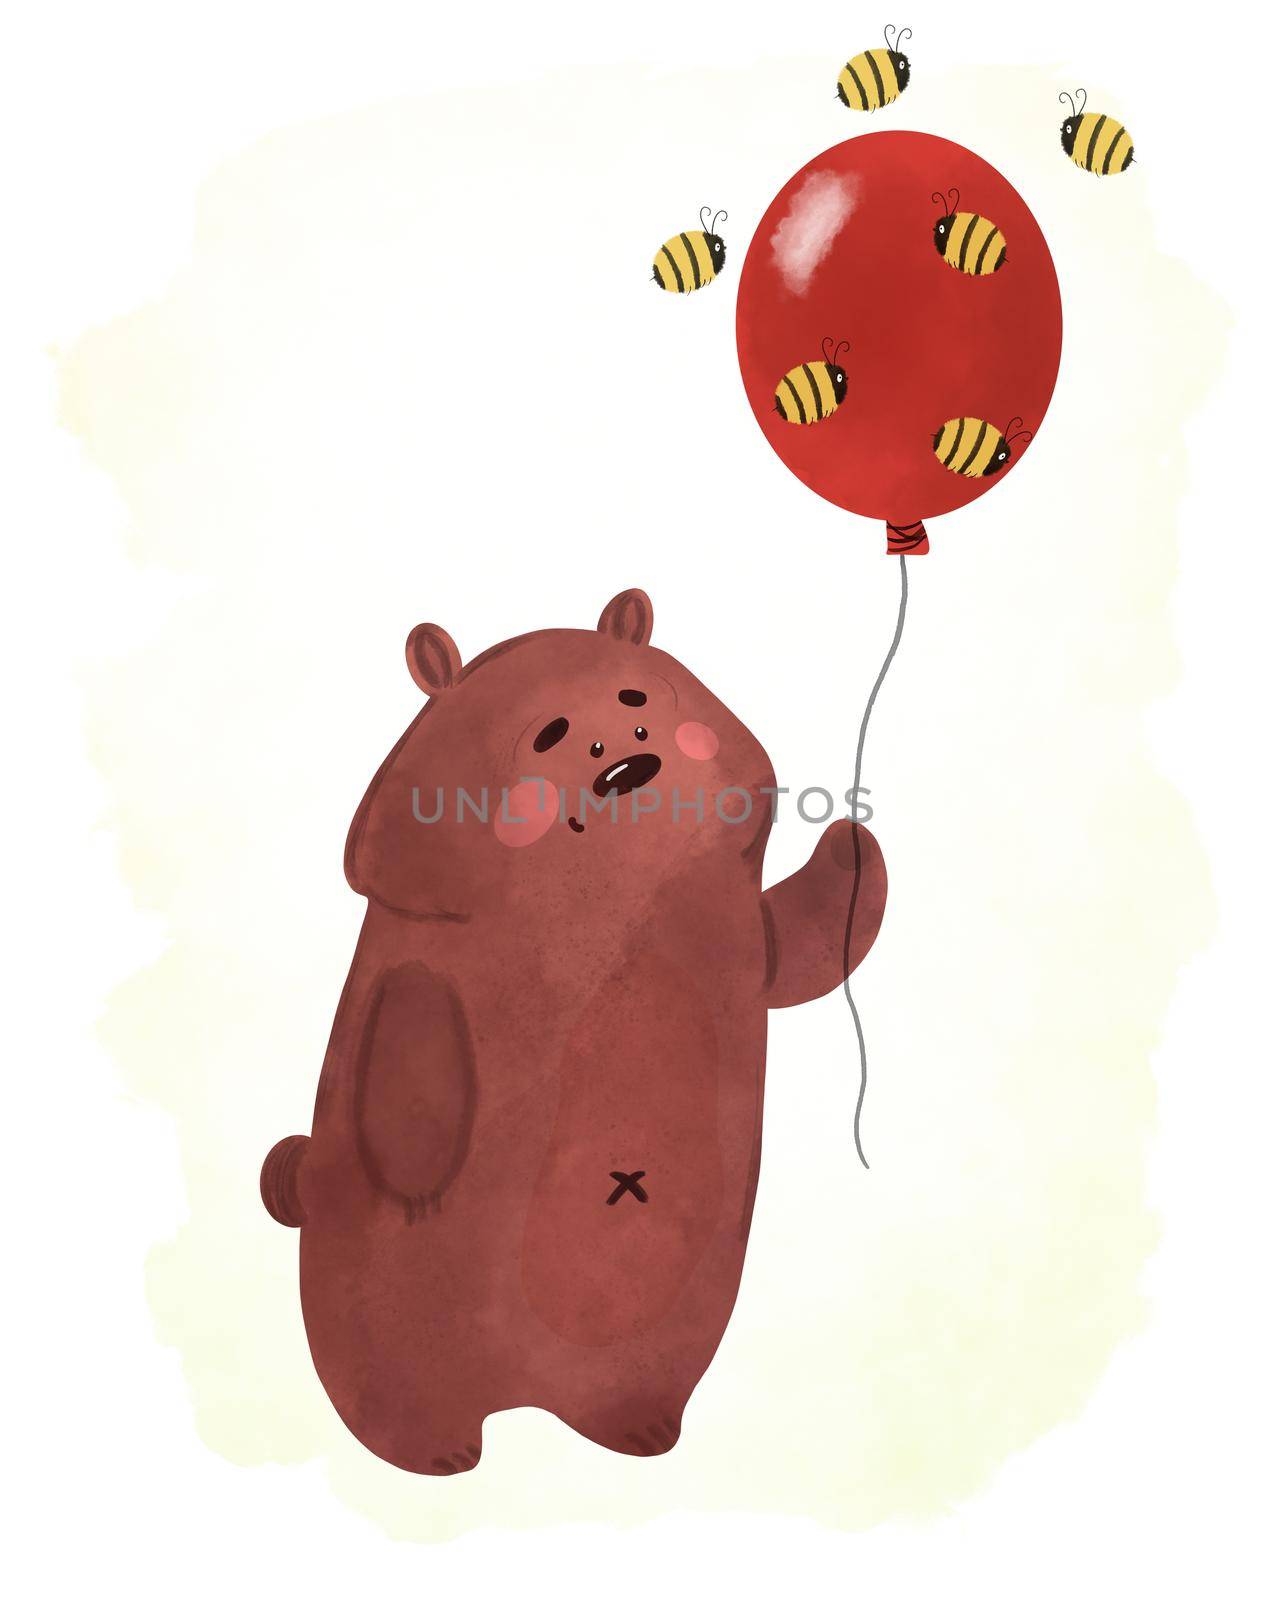 Cute bear with red balloon and bees, watercolor illustration by lifesummerlin